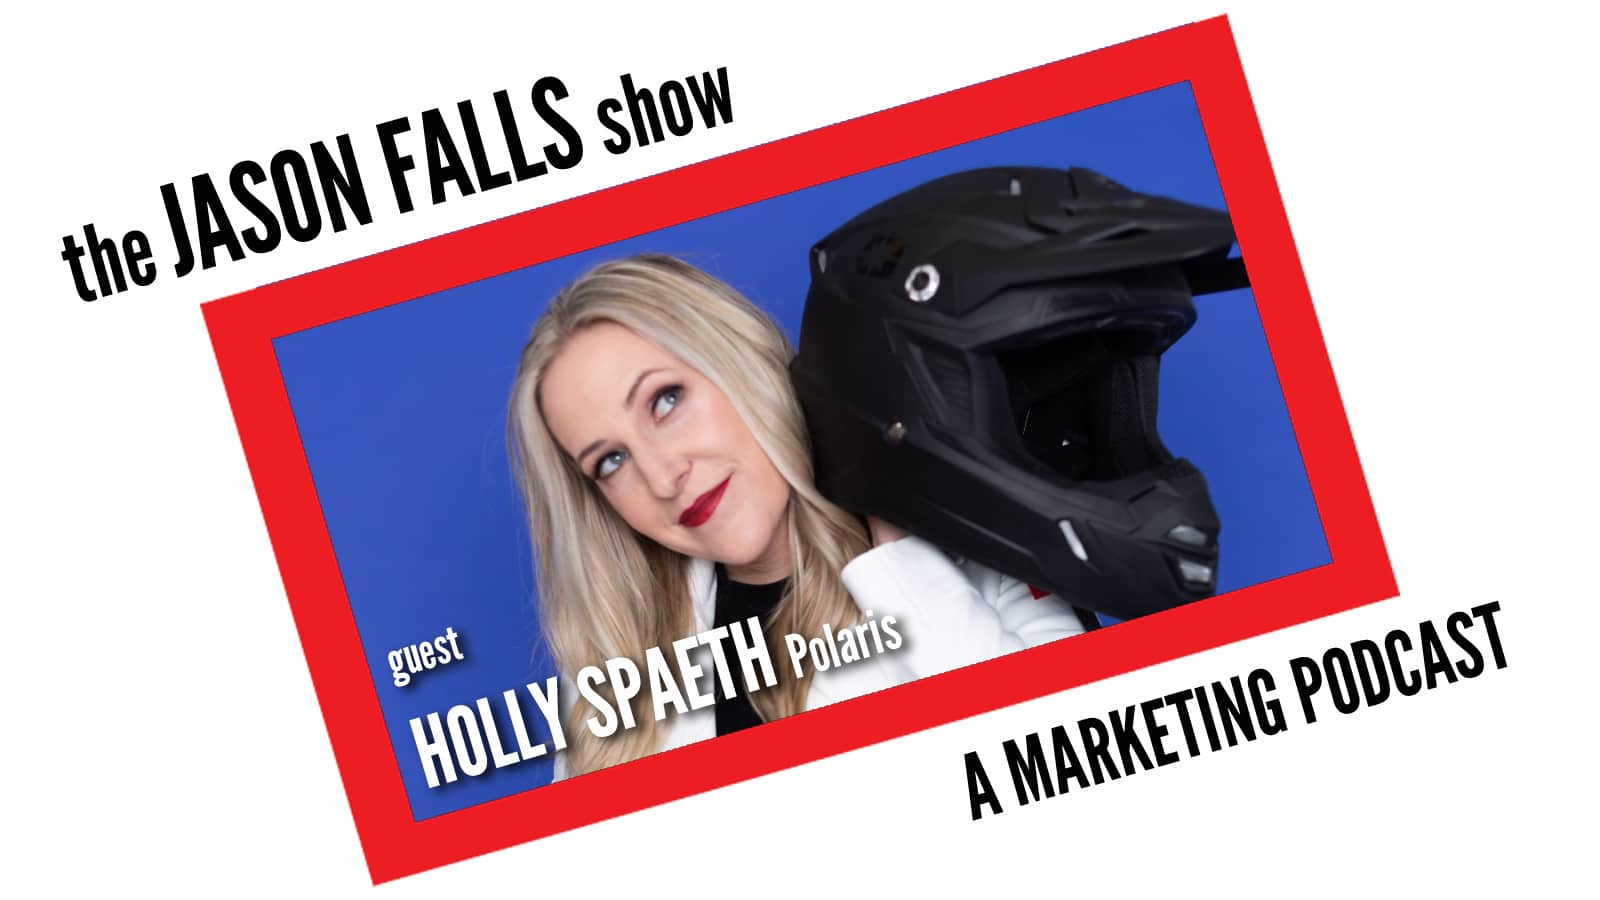 Holly Spaeth on Corporate Marketing for Adventure Brands on the Jason Falls Show